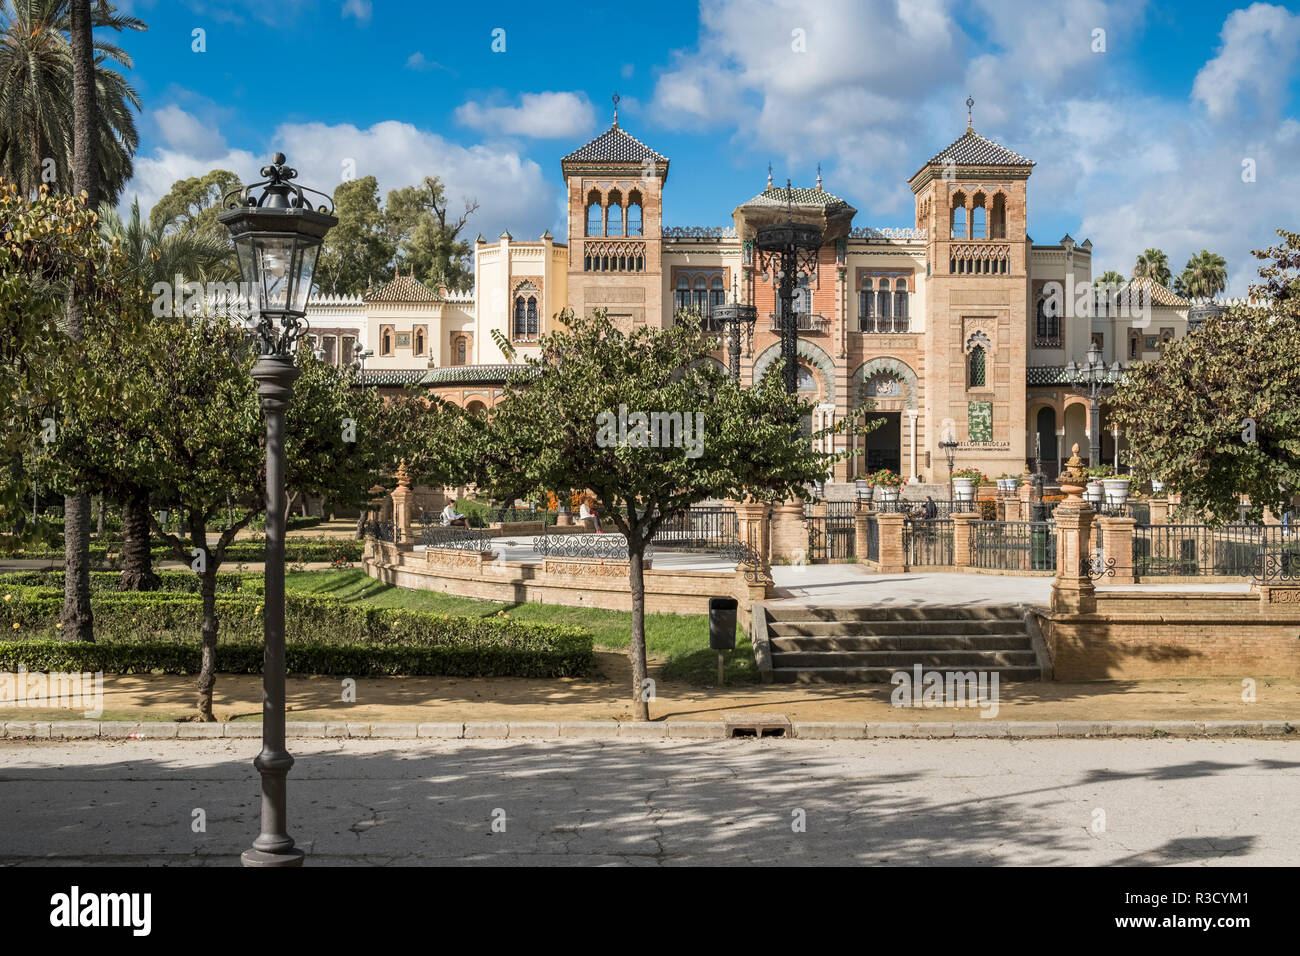 Pabellon Mudejar building, Museum of Arts and Popular Customs of Seville, María Luisa Park, Seville, Andalucia, Spain Stock Photo